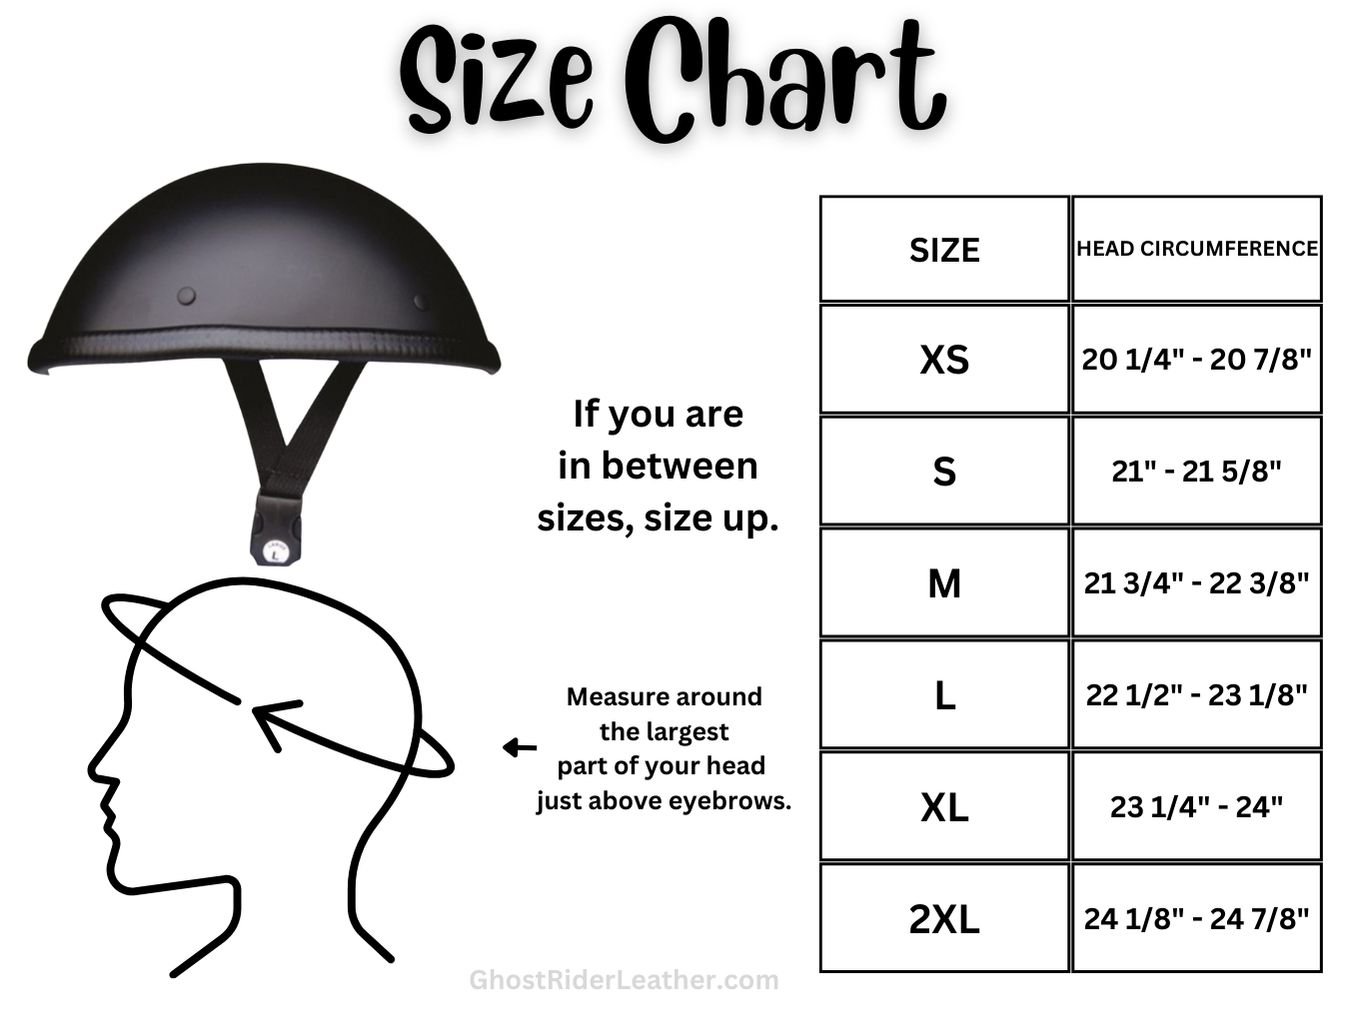 Size chart for Novelty Helmets at Ghost Rider Leather.